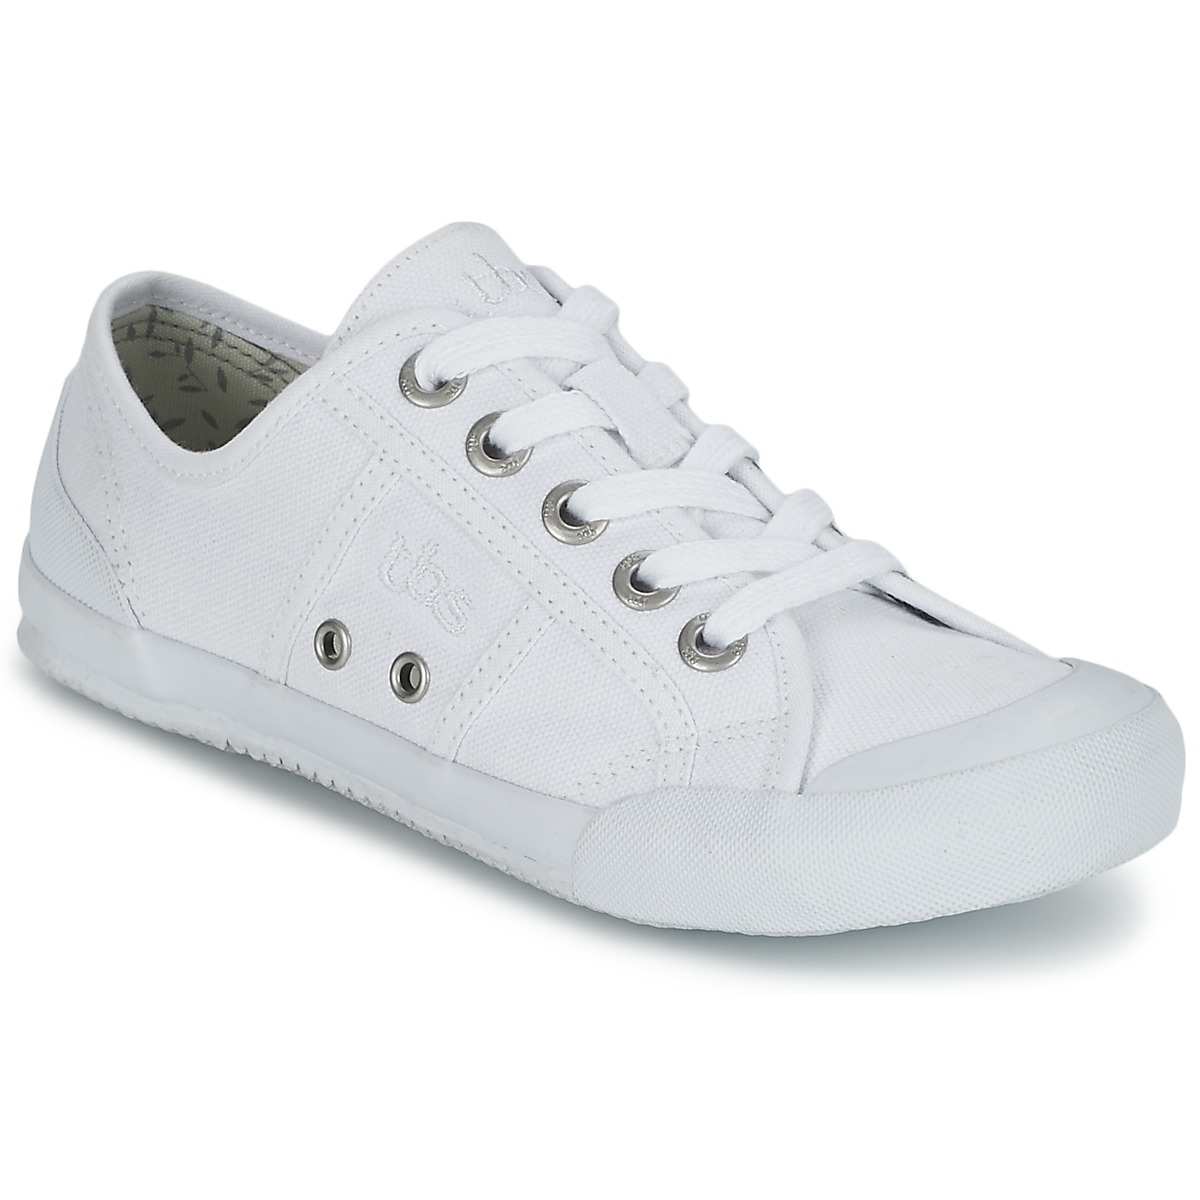 Shoes Women Low top trainers TBS OPIACE White